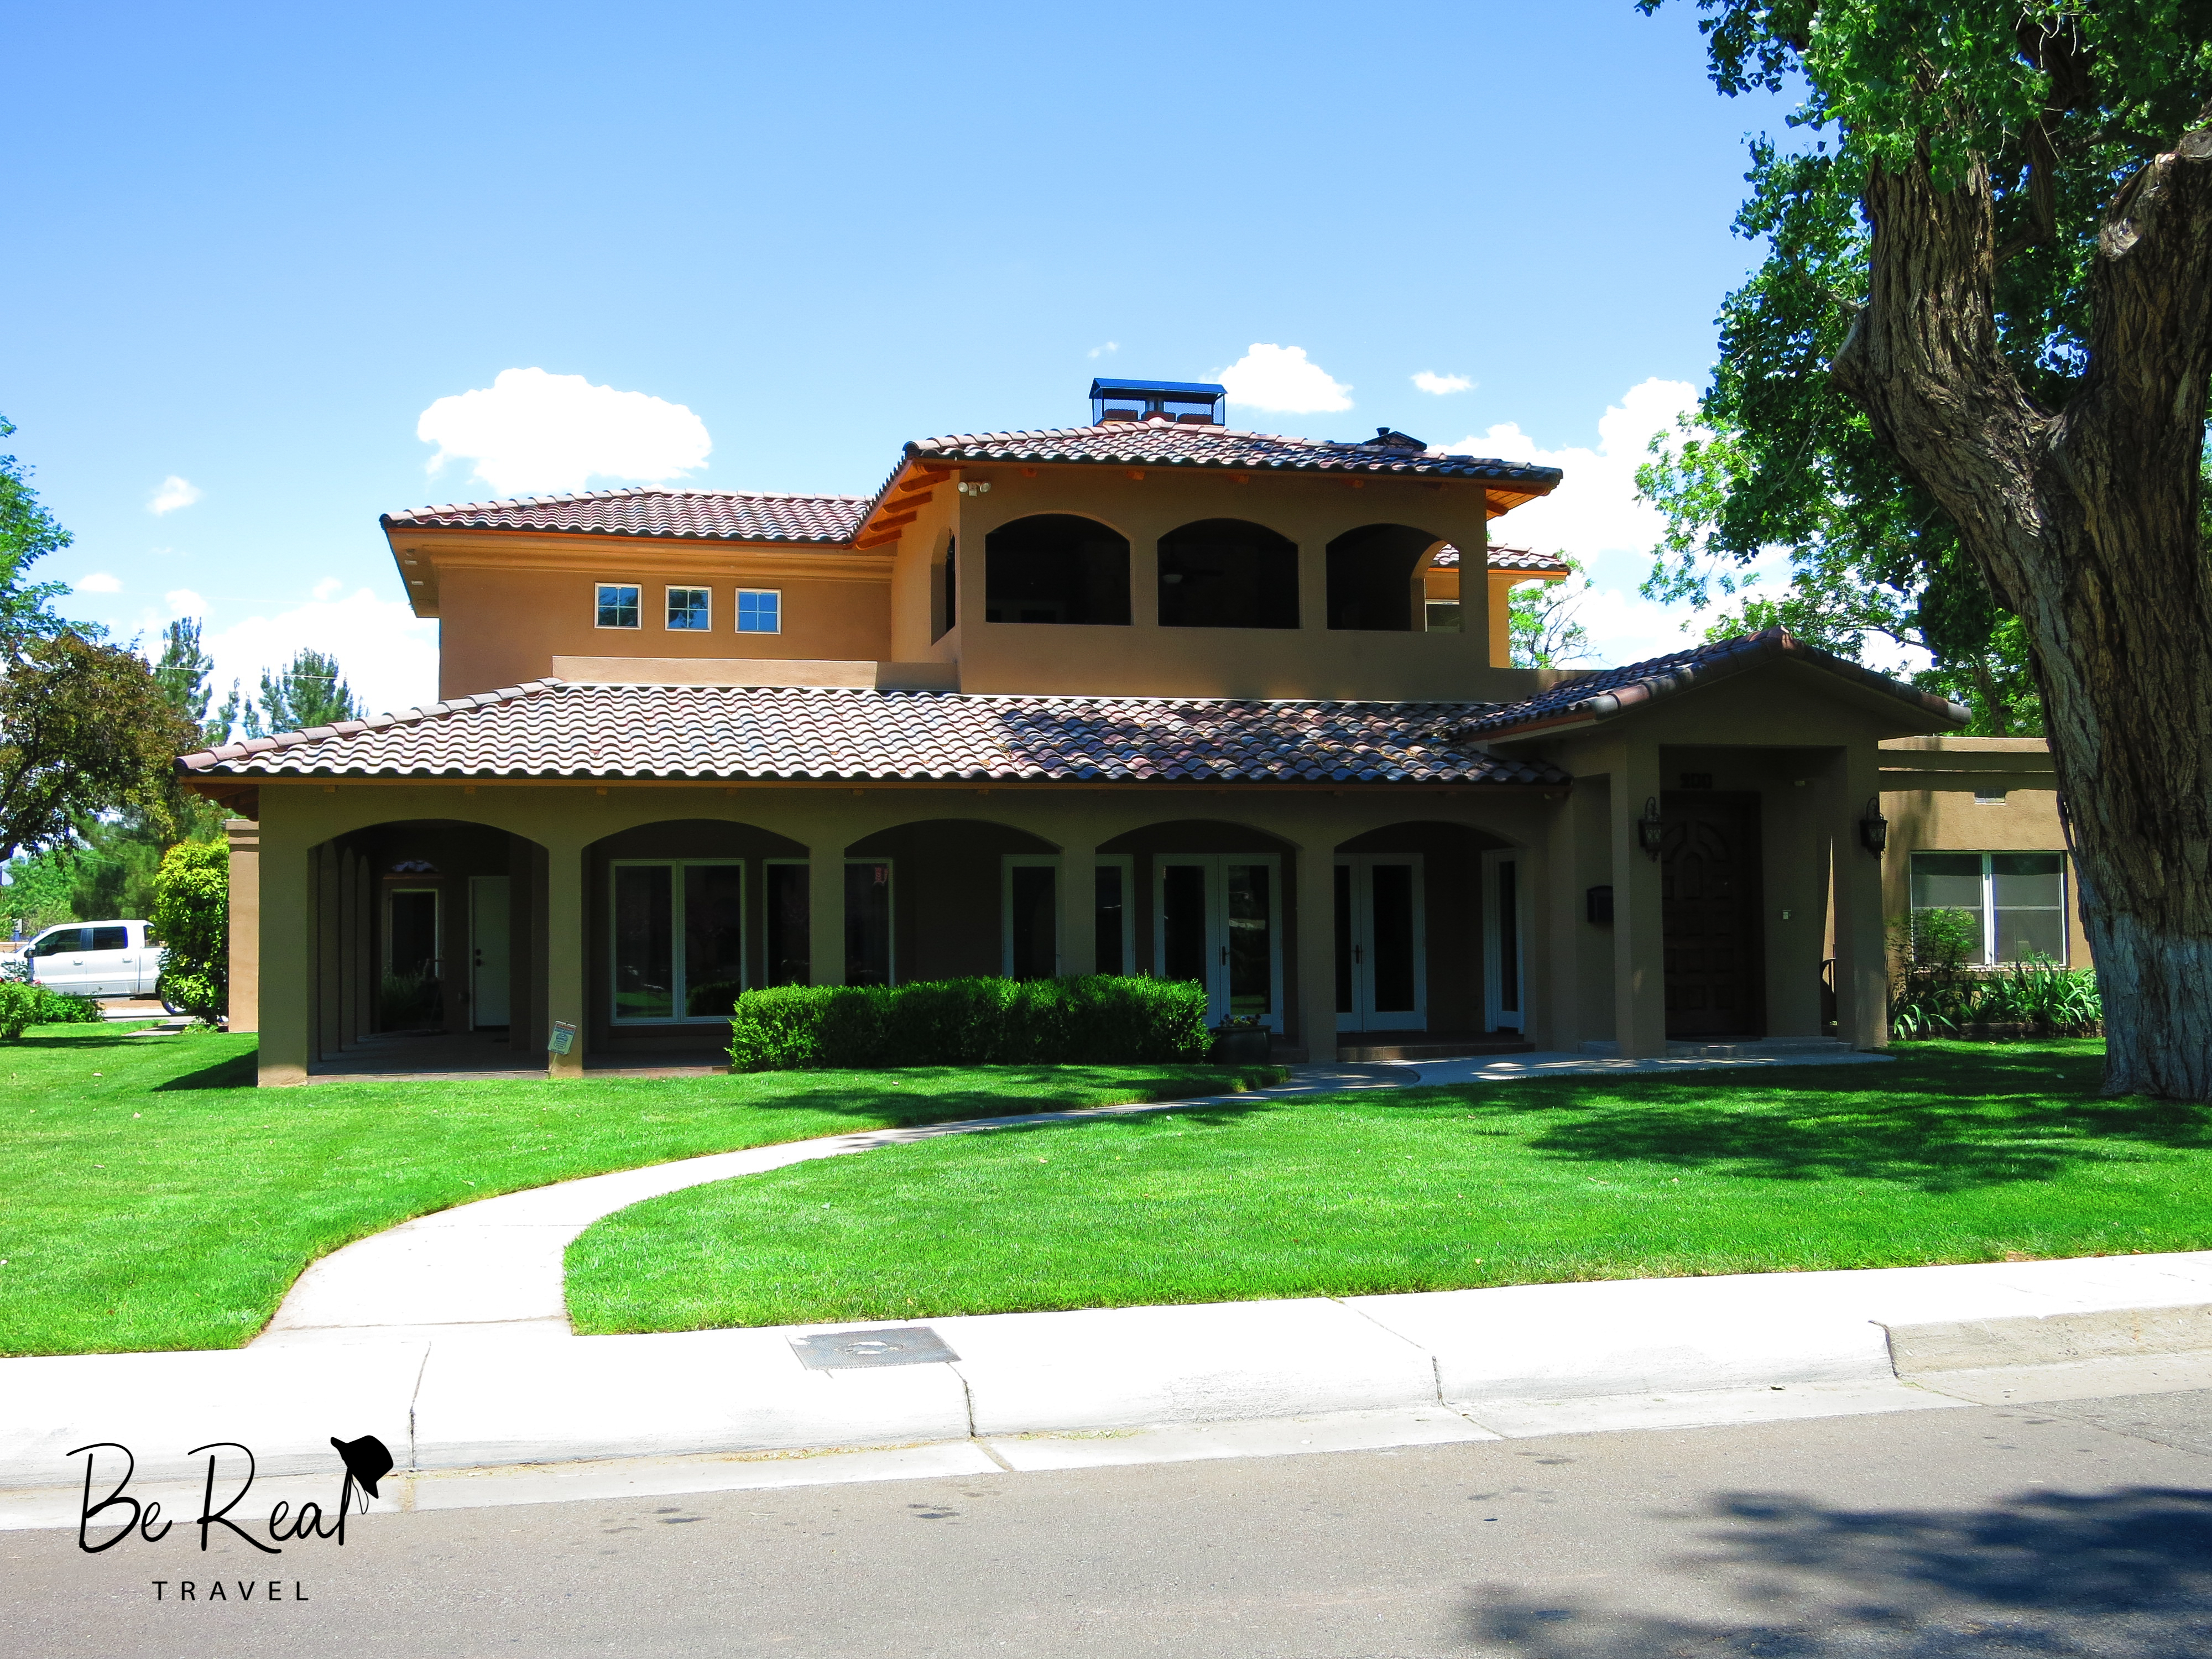 A two-story house with large windows sits behind a verdant lawn; this house was Ted Beneke's house in New Mexico Breaking Bad